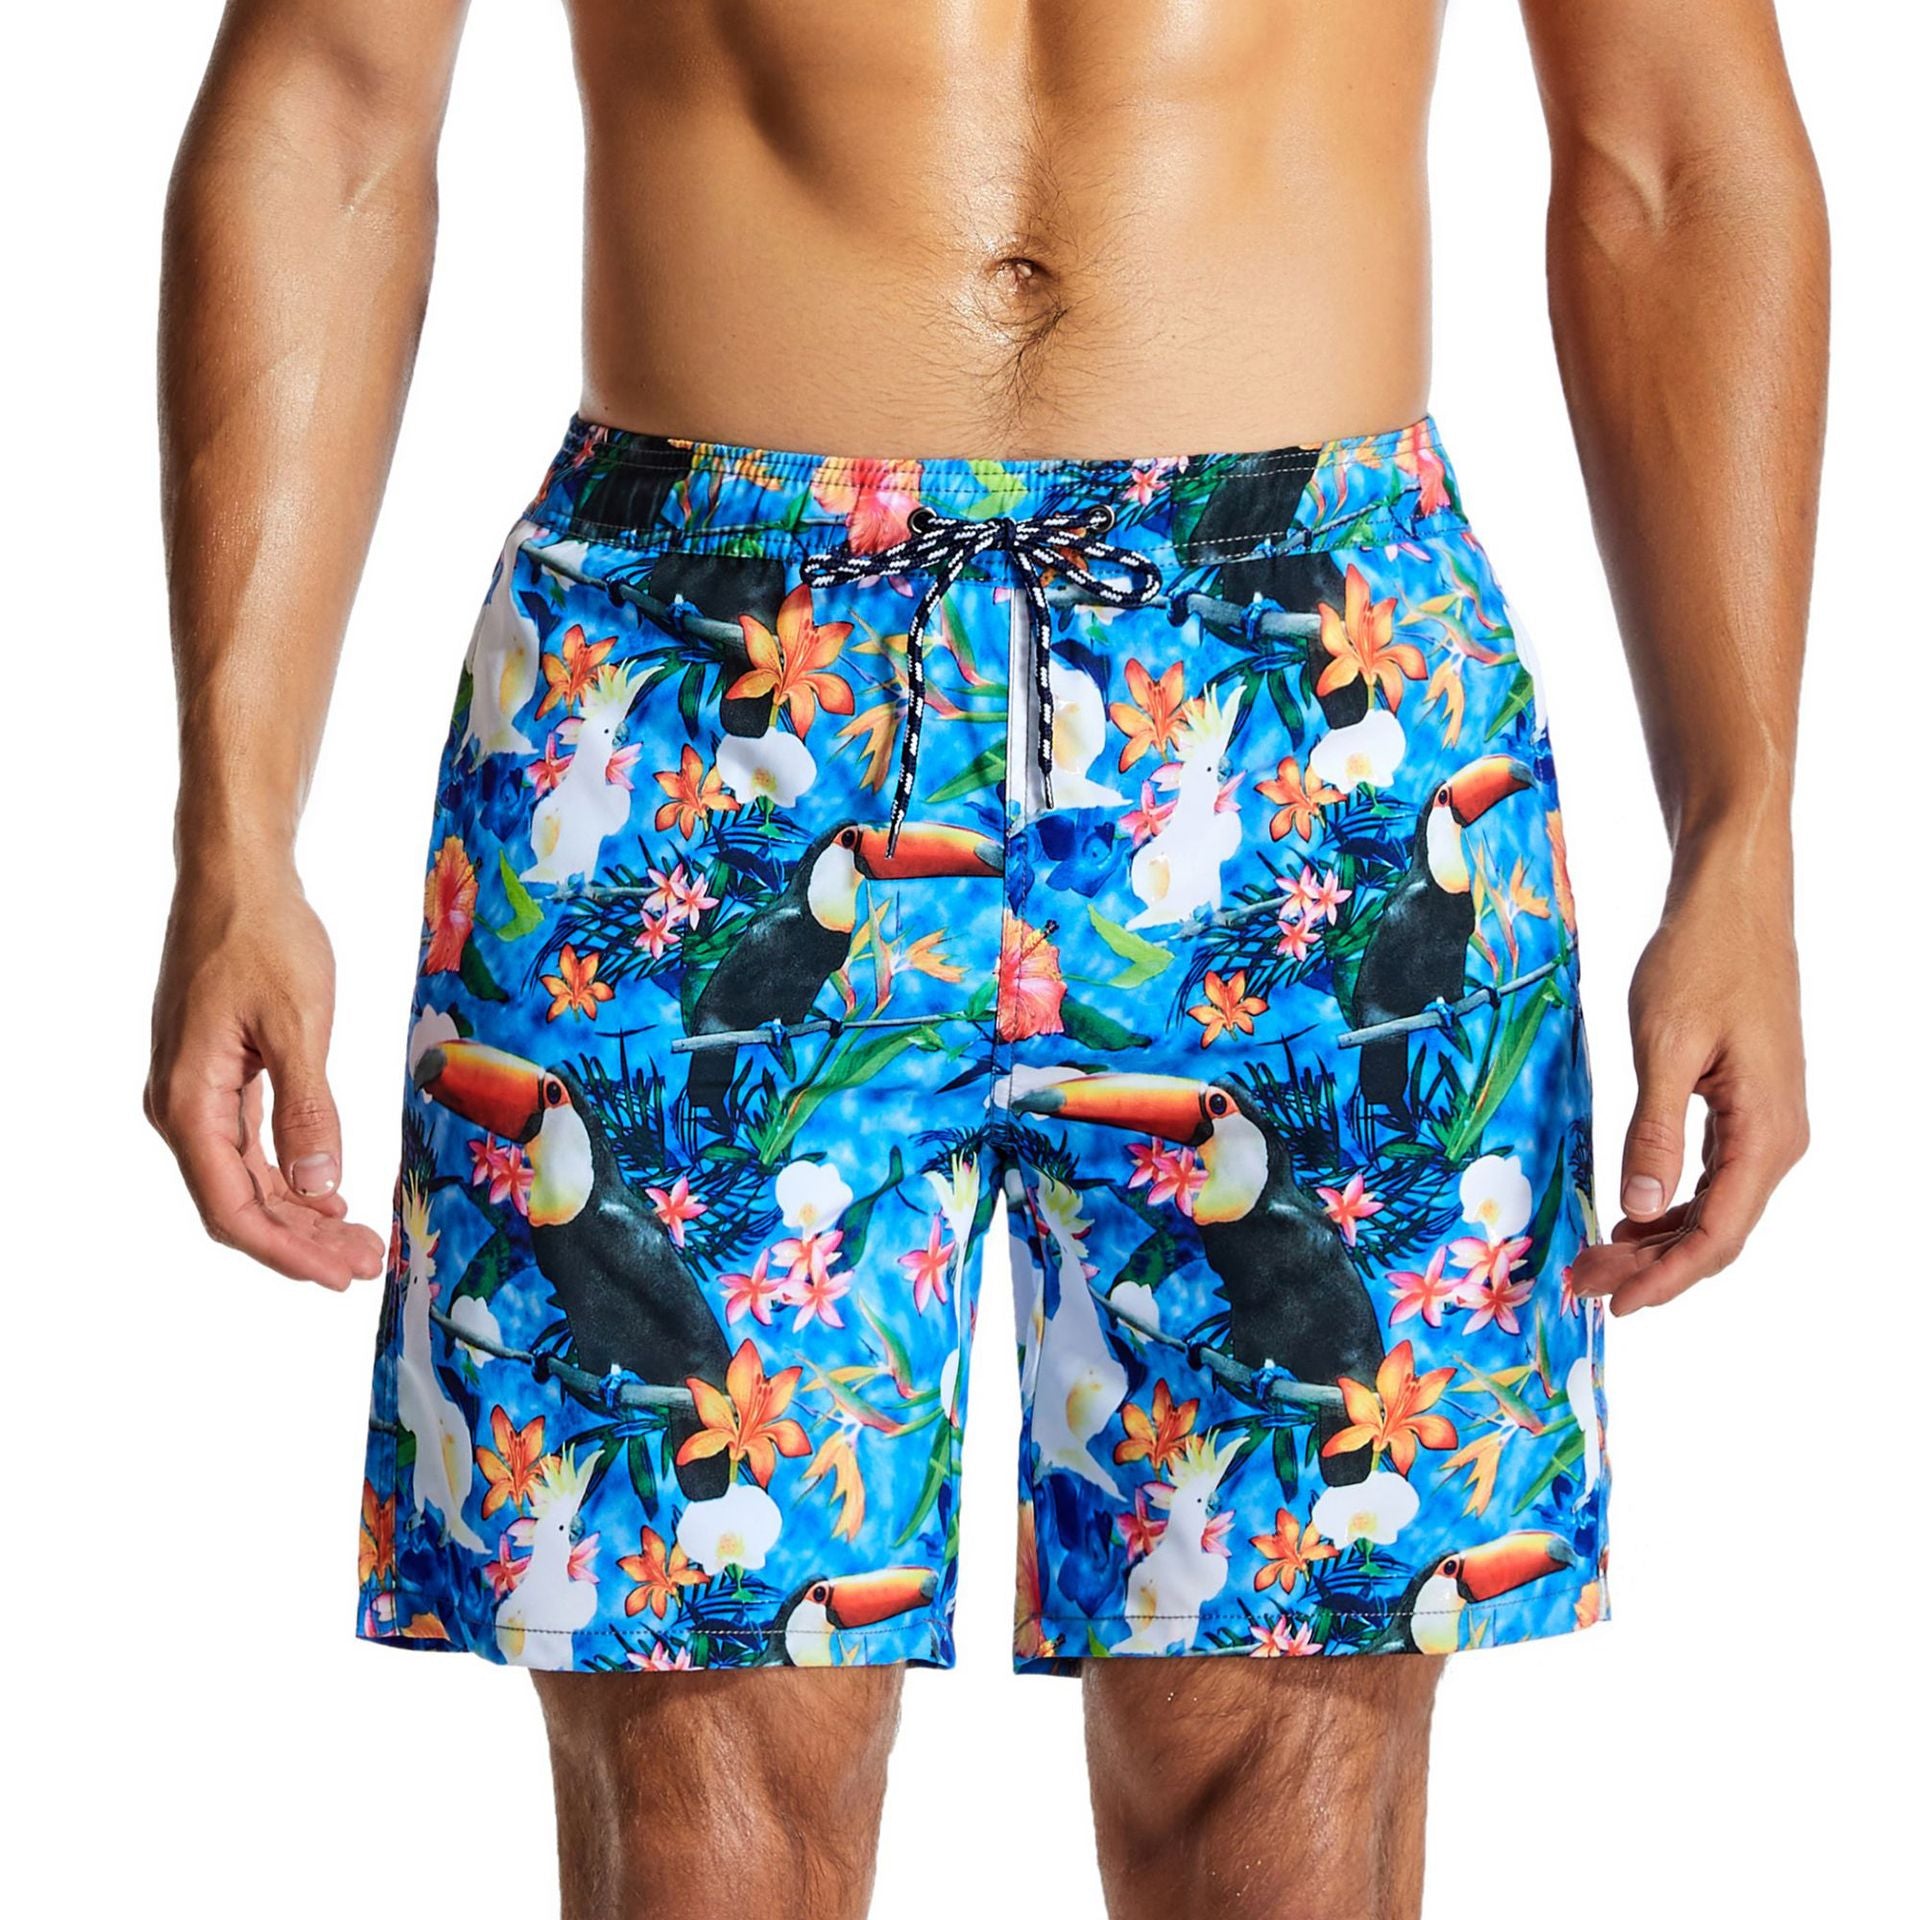 Men's Swim Trunks with Compression Liner Quick Dry 7" Inseam Swimsuit Swimwear - Flowers Toucans